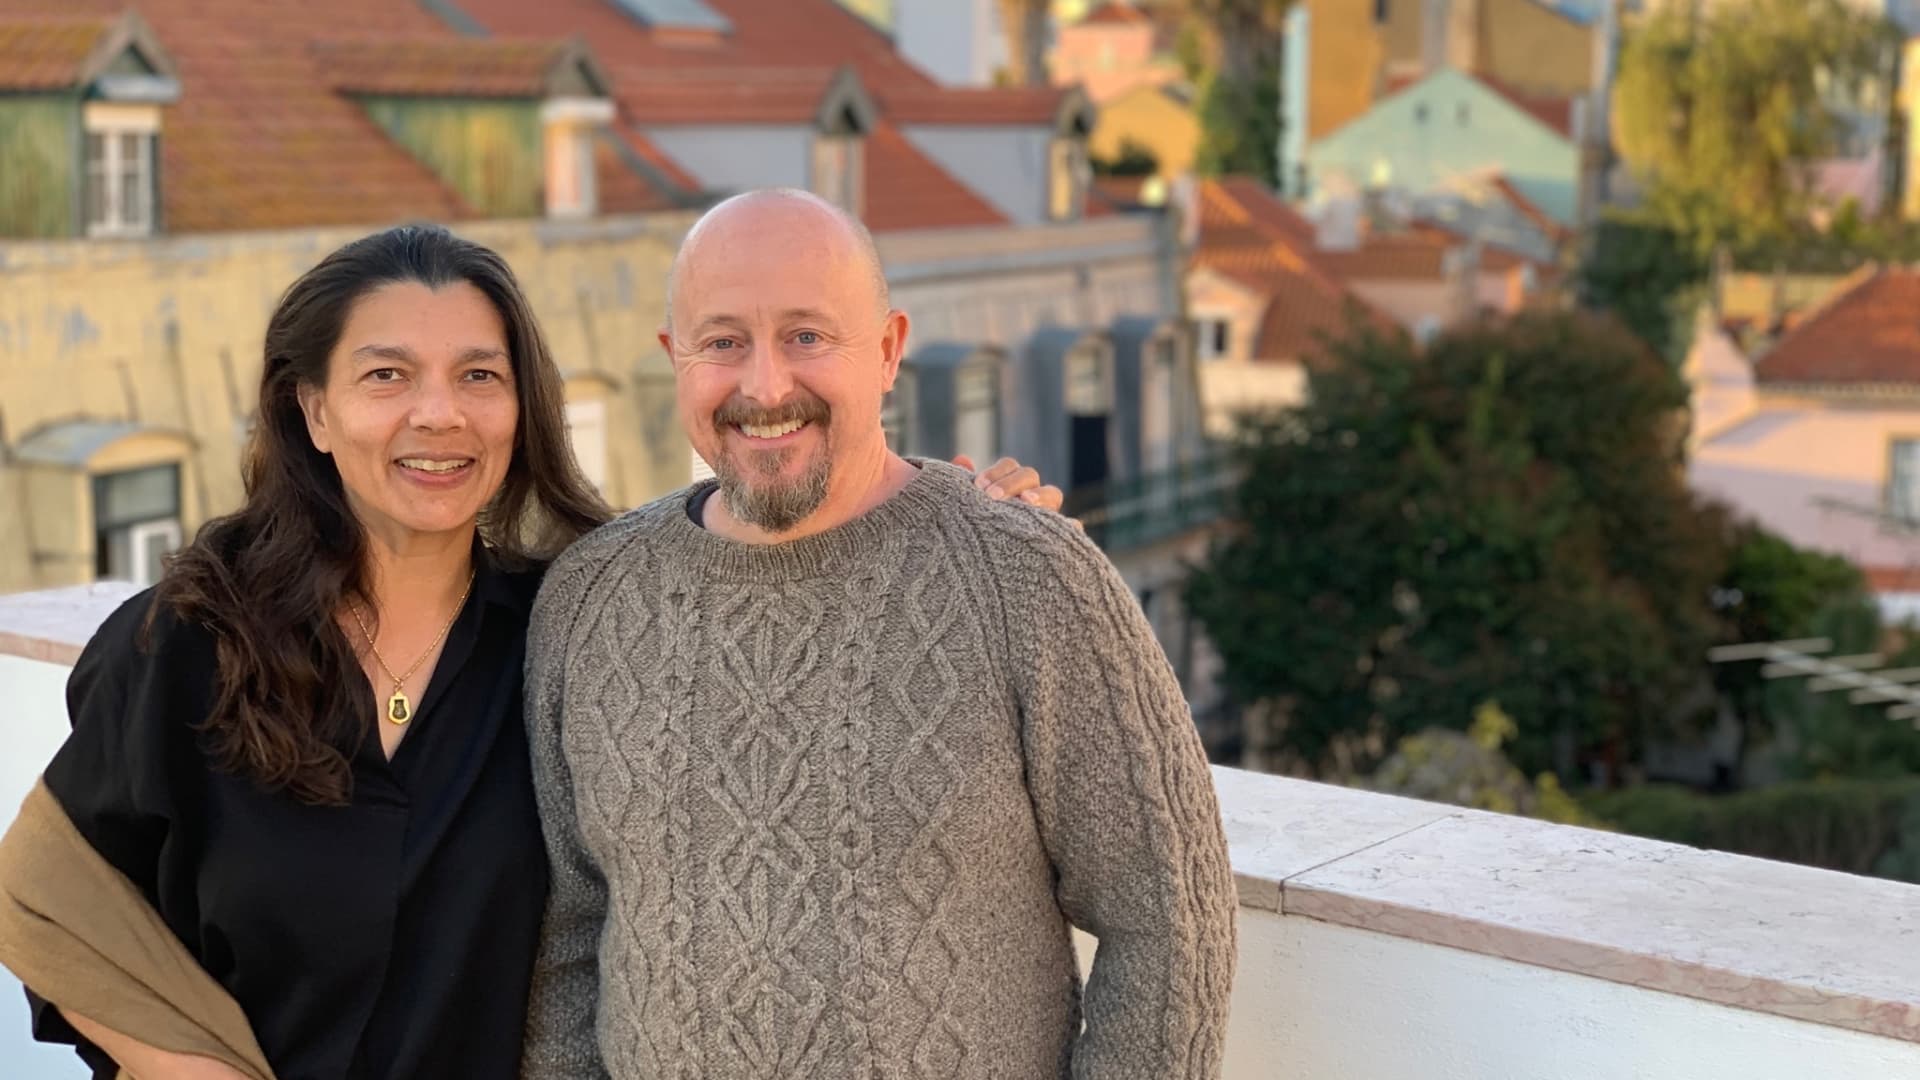 This 52-year-old early retiree left the U.S. for Portugal with his family—and spends ,450 a month: ‘We cut our expenses by 50%’